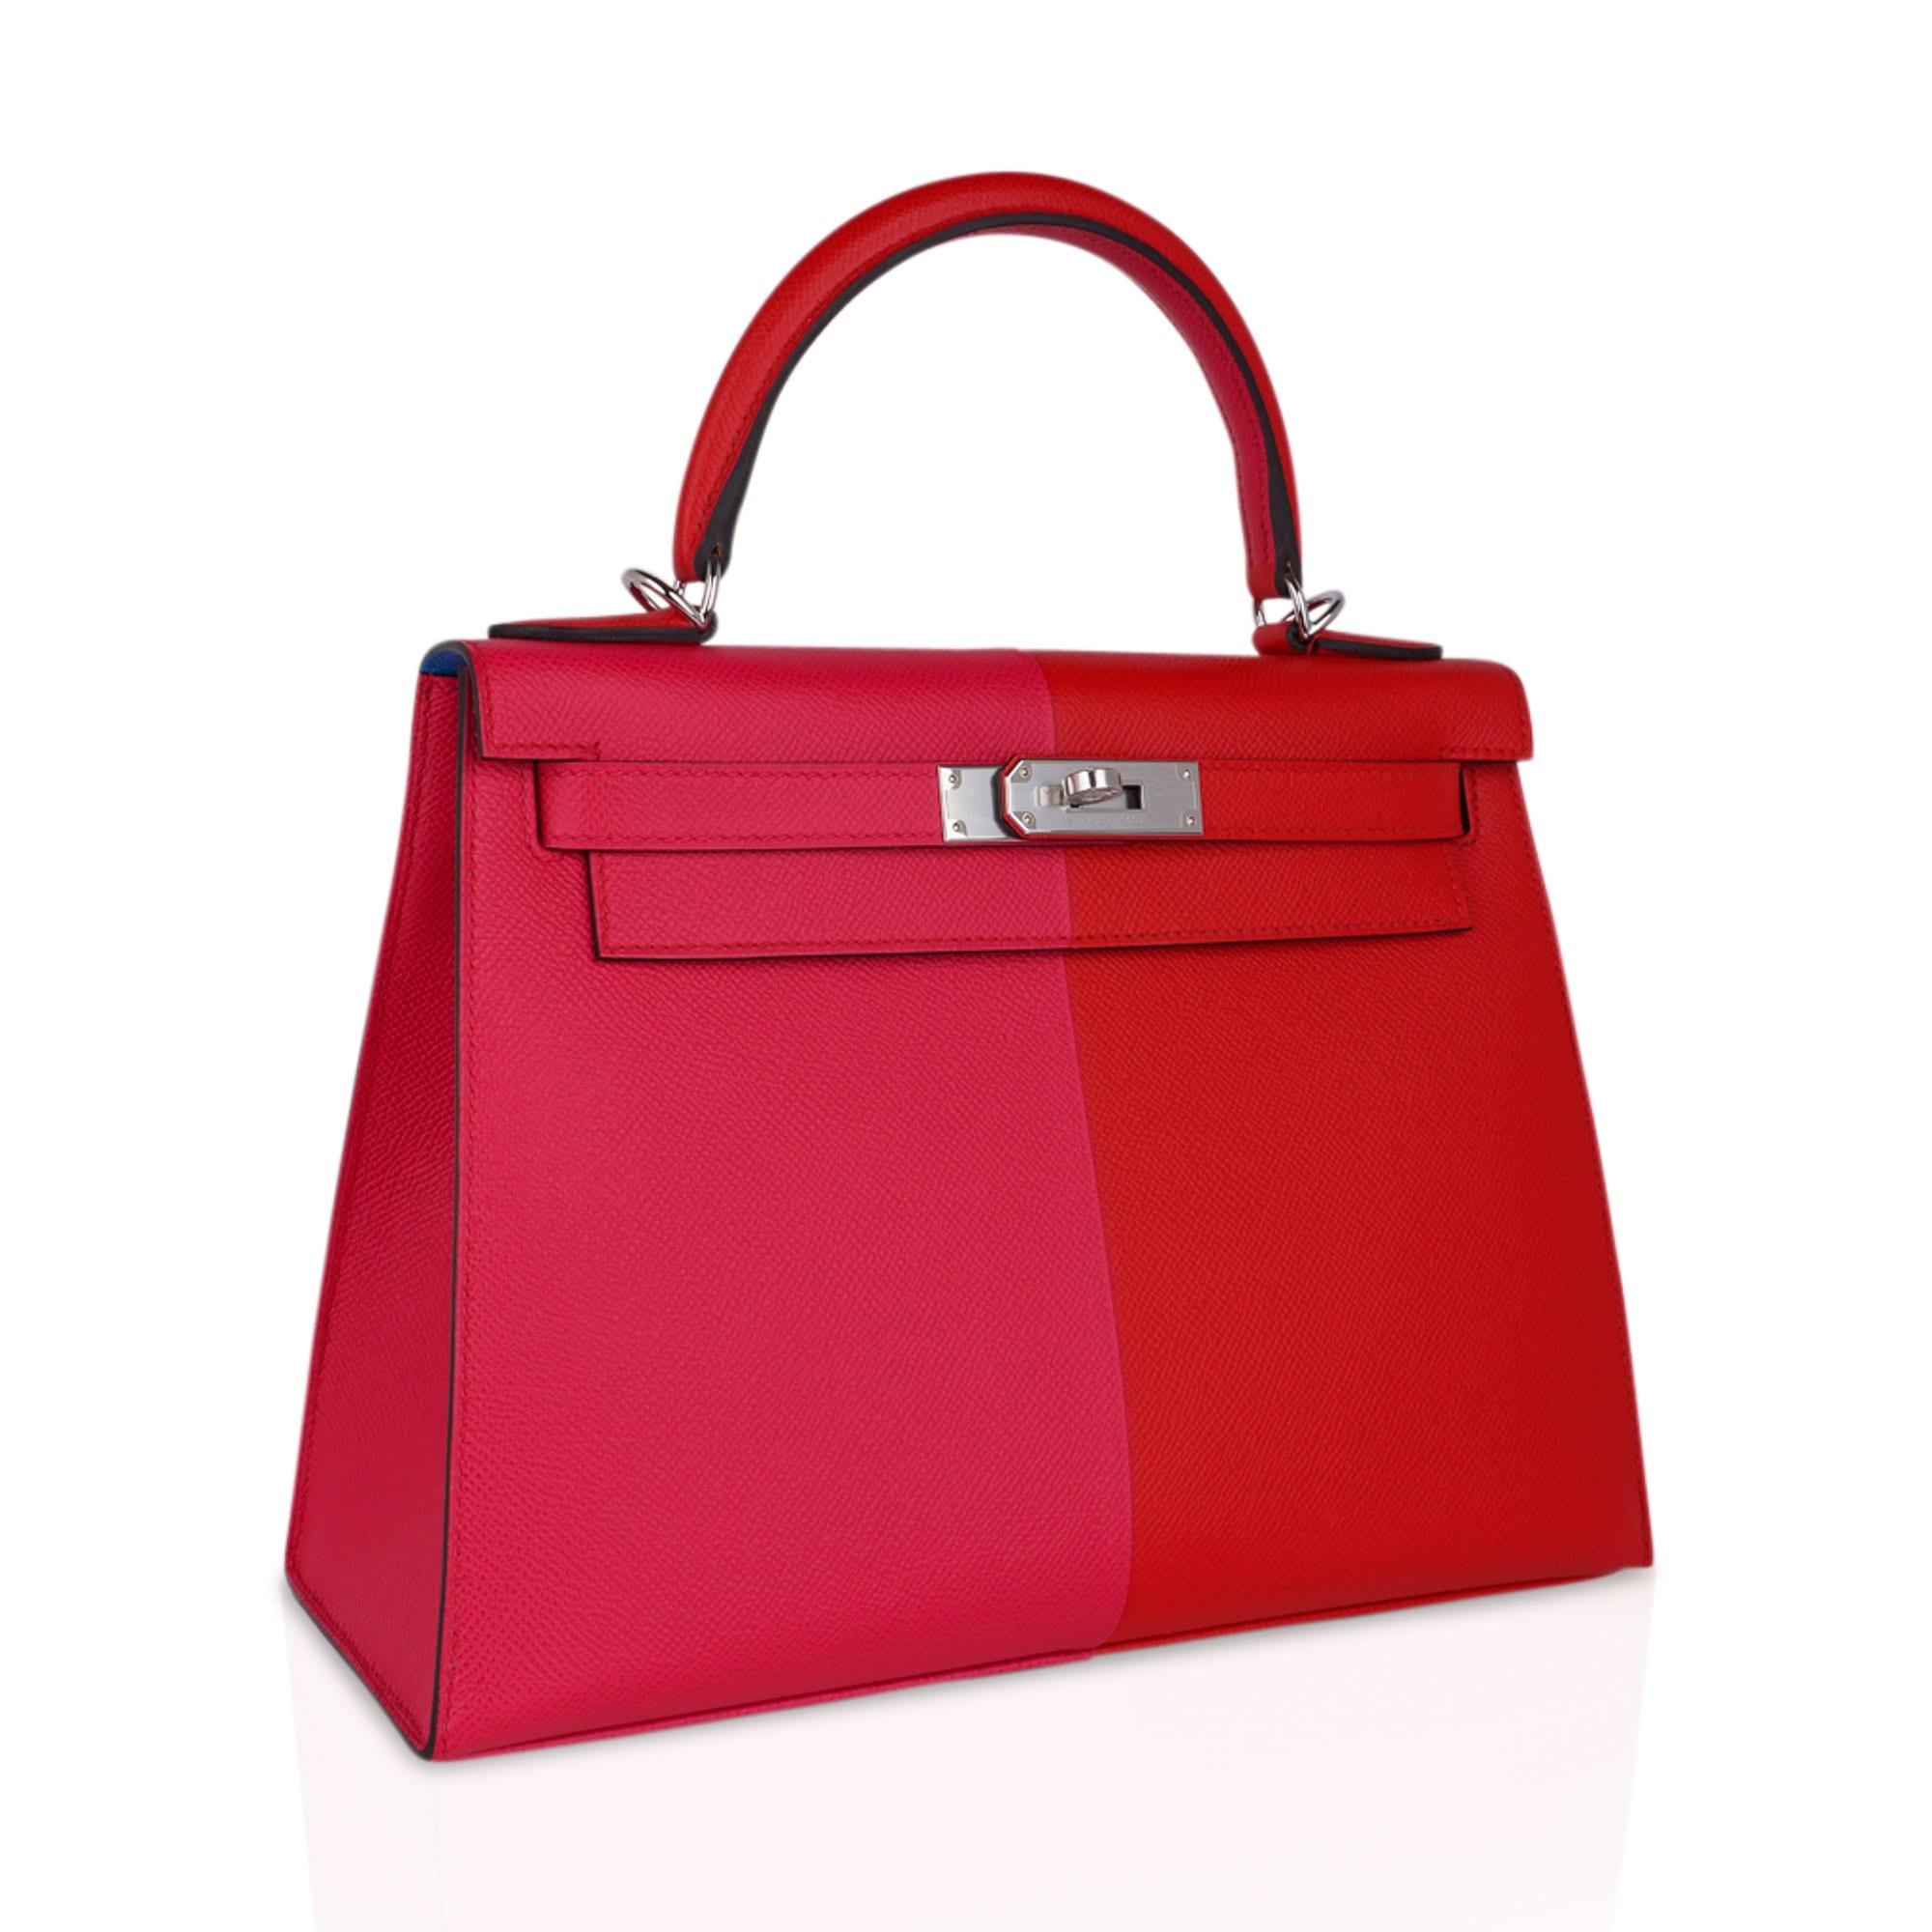 hermes #Kelly #25 #rouge #casaque #valentines #day #love #hearts